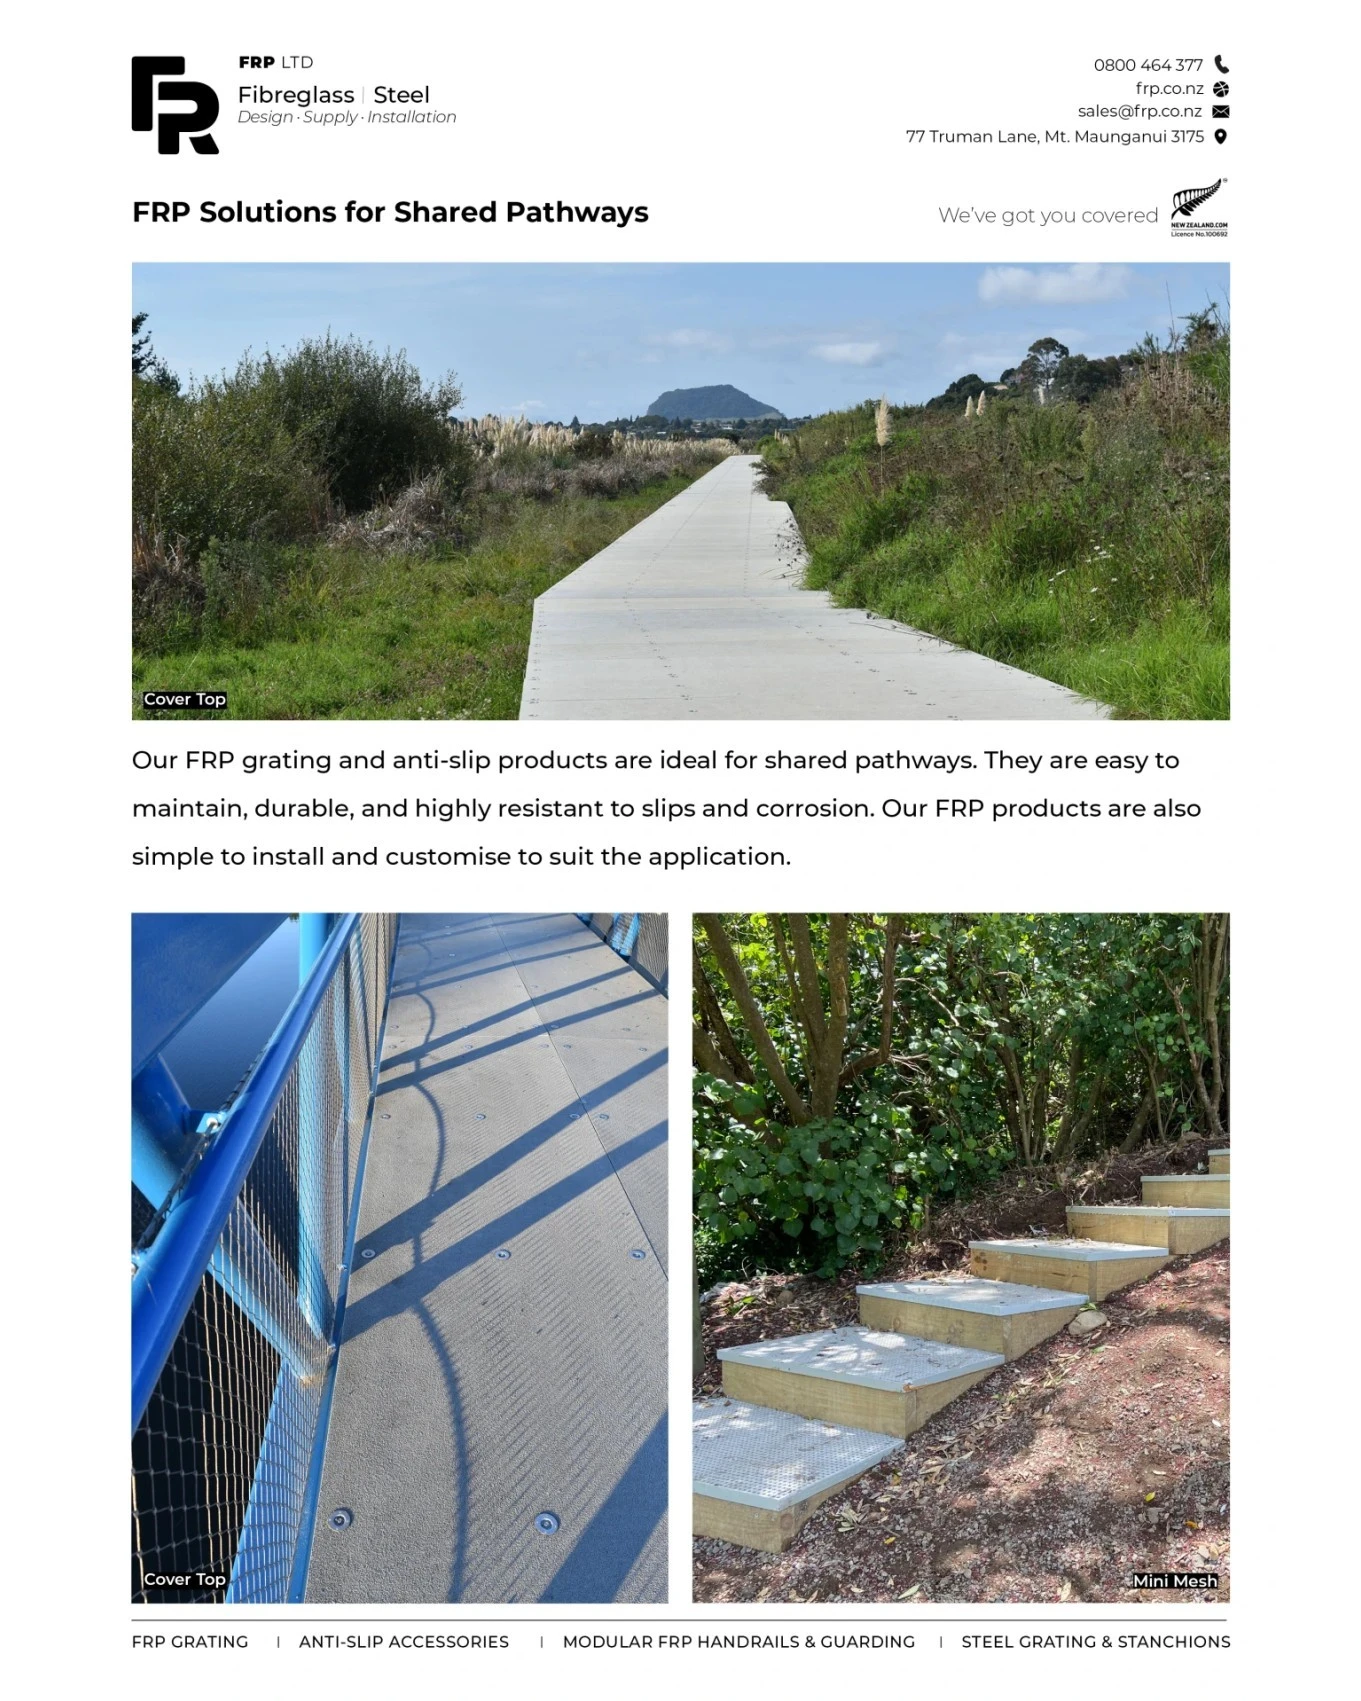 Enquire for a pathway solution.

#frp #frpproducts #commercial #industrial #civil #councils #pathways #walkways #stairs #bridges #cityplanning #nzconstruction #nzarchitects